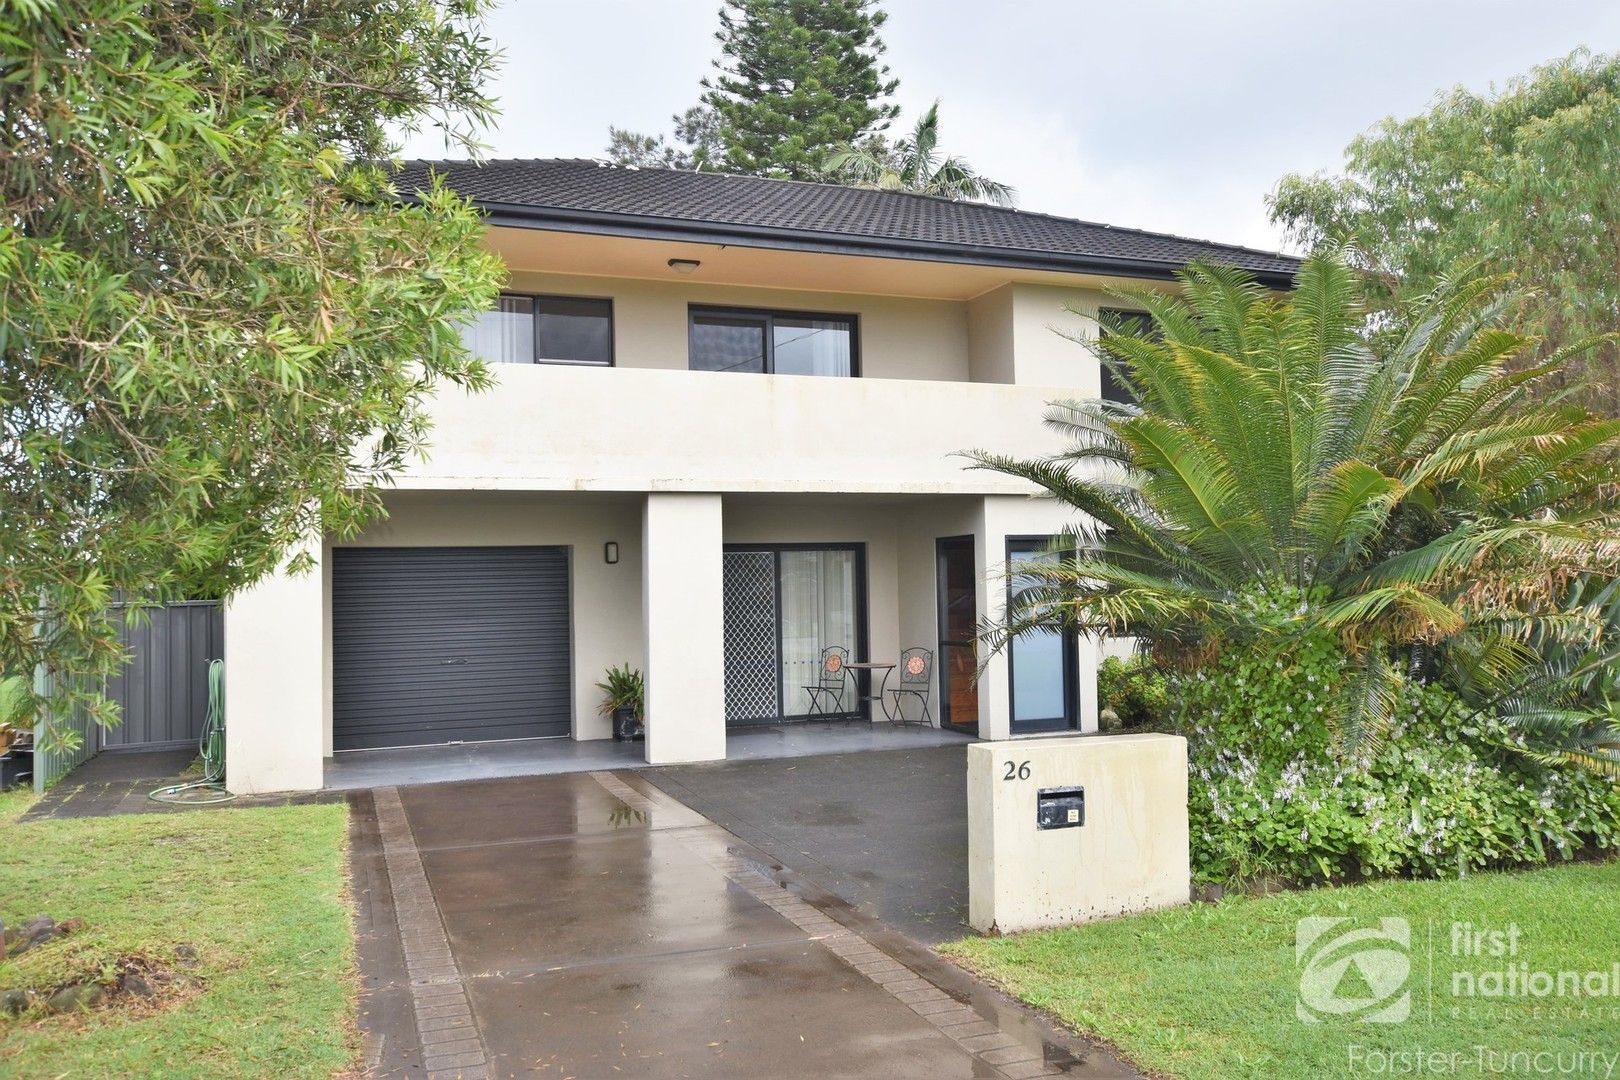 2 bedrooms Semi-Detached in 2/26 Wharf Street TUNCURRY NSW, 2428